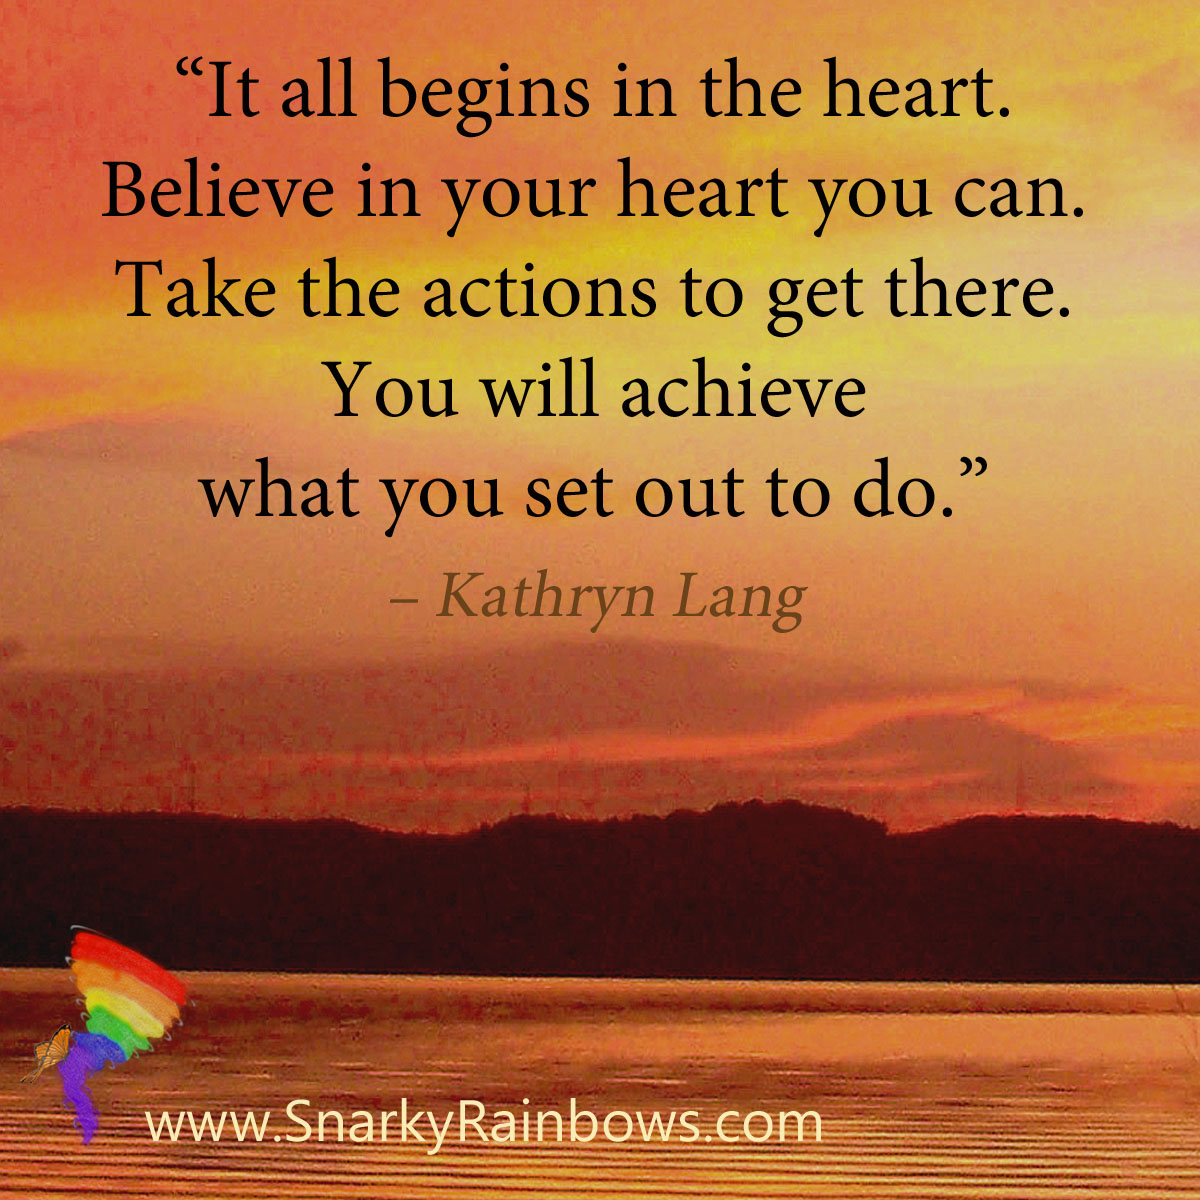 #QuoteoftheDay - It Begins in the heart